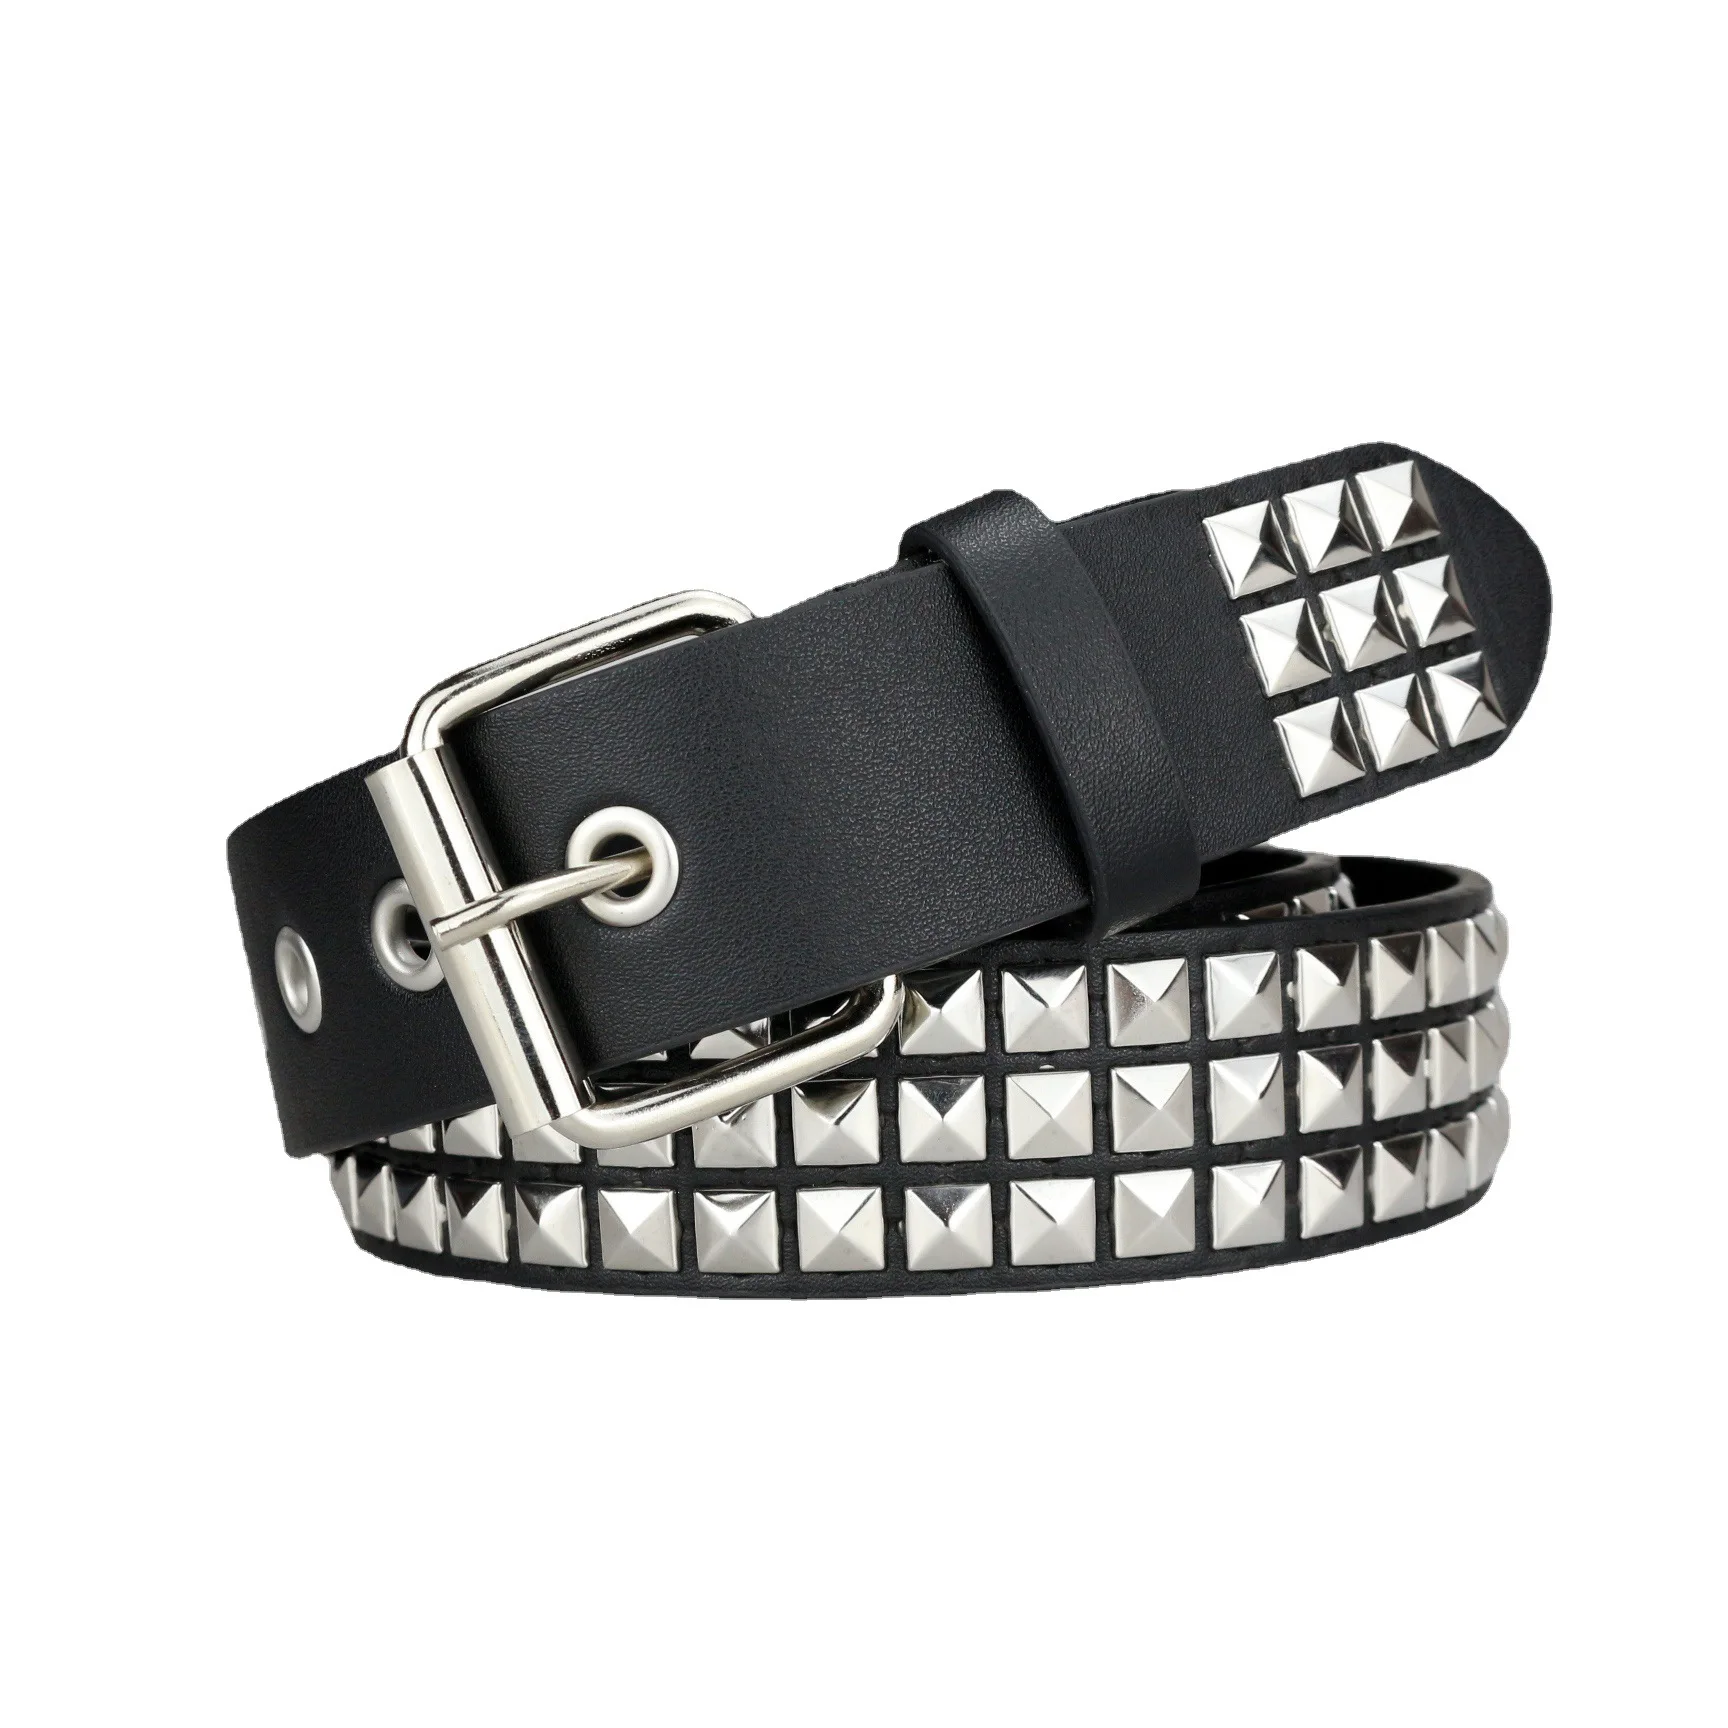 New Fashion Square Bead Rivet Belt Metal Pyramid Belt Men and Women Punk Hardware Jeans Belt with Pin Buckle Woman Waistband